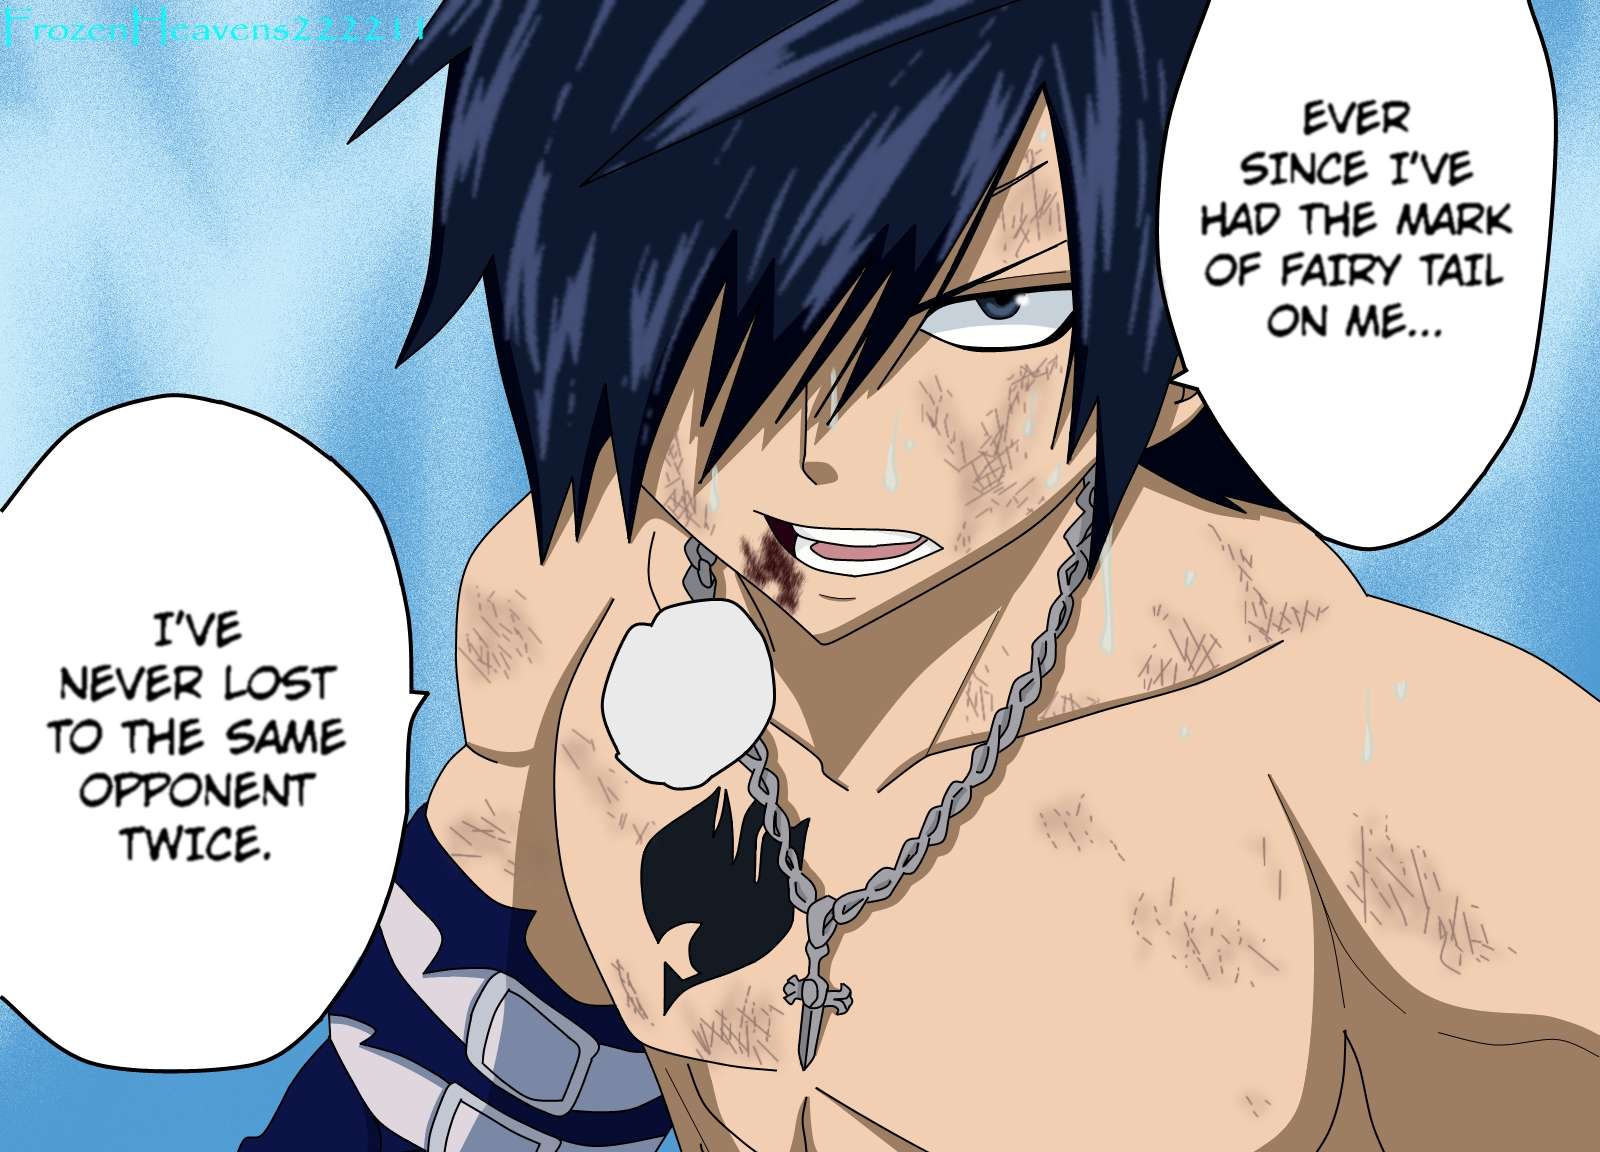 image about Gray Fullbuster. Devil, Grey